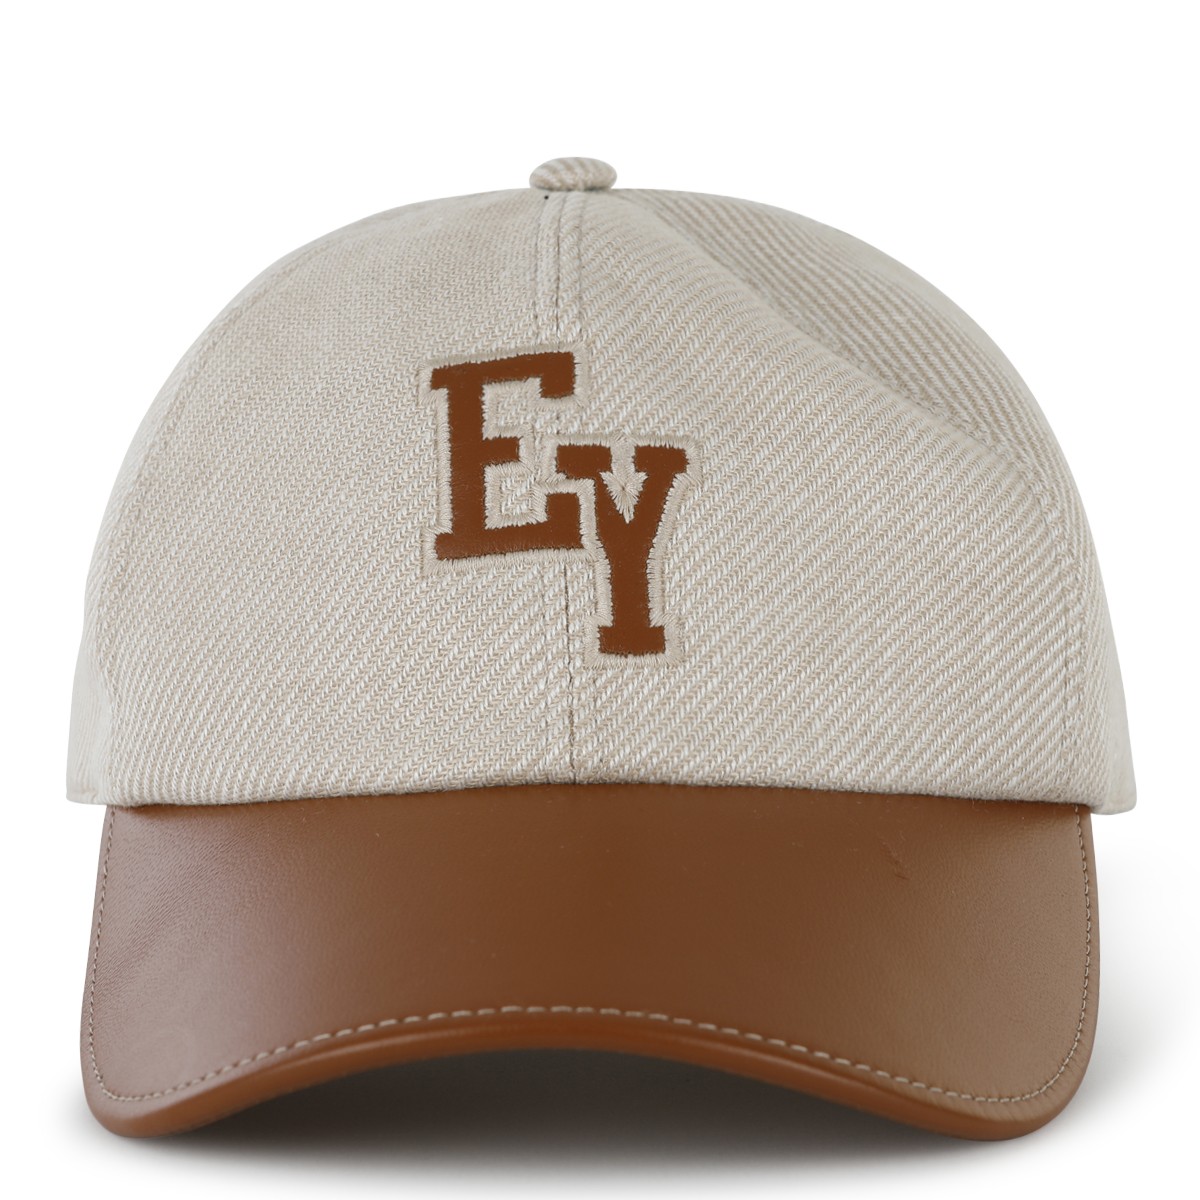 BEIGE CANVAS AND BROWN LEATHER BASEBALL CAP